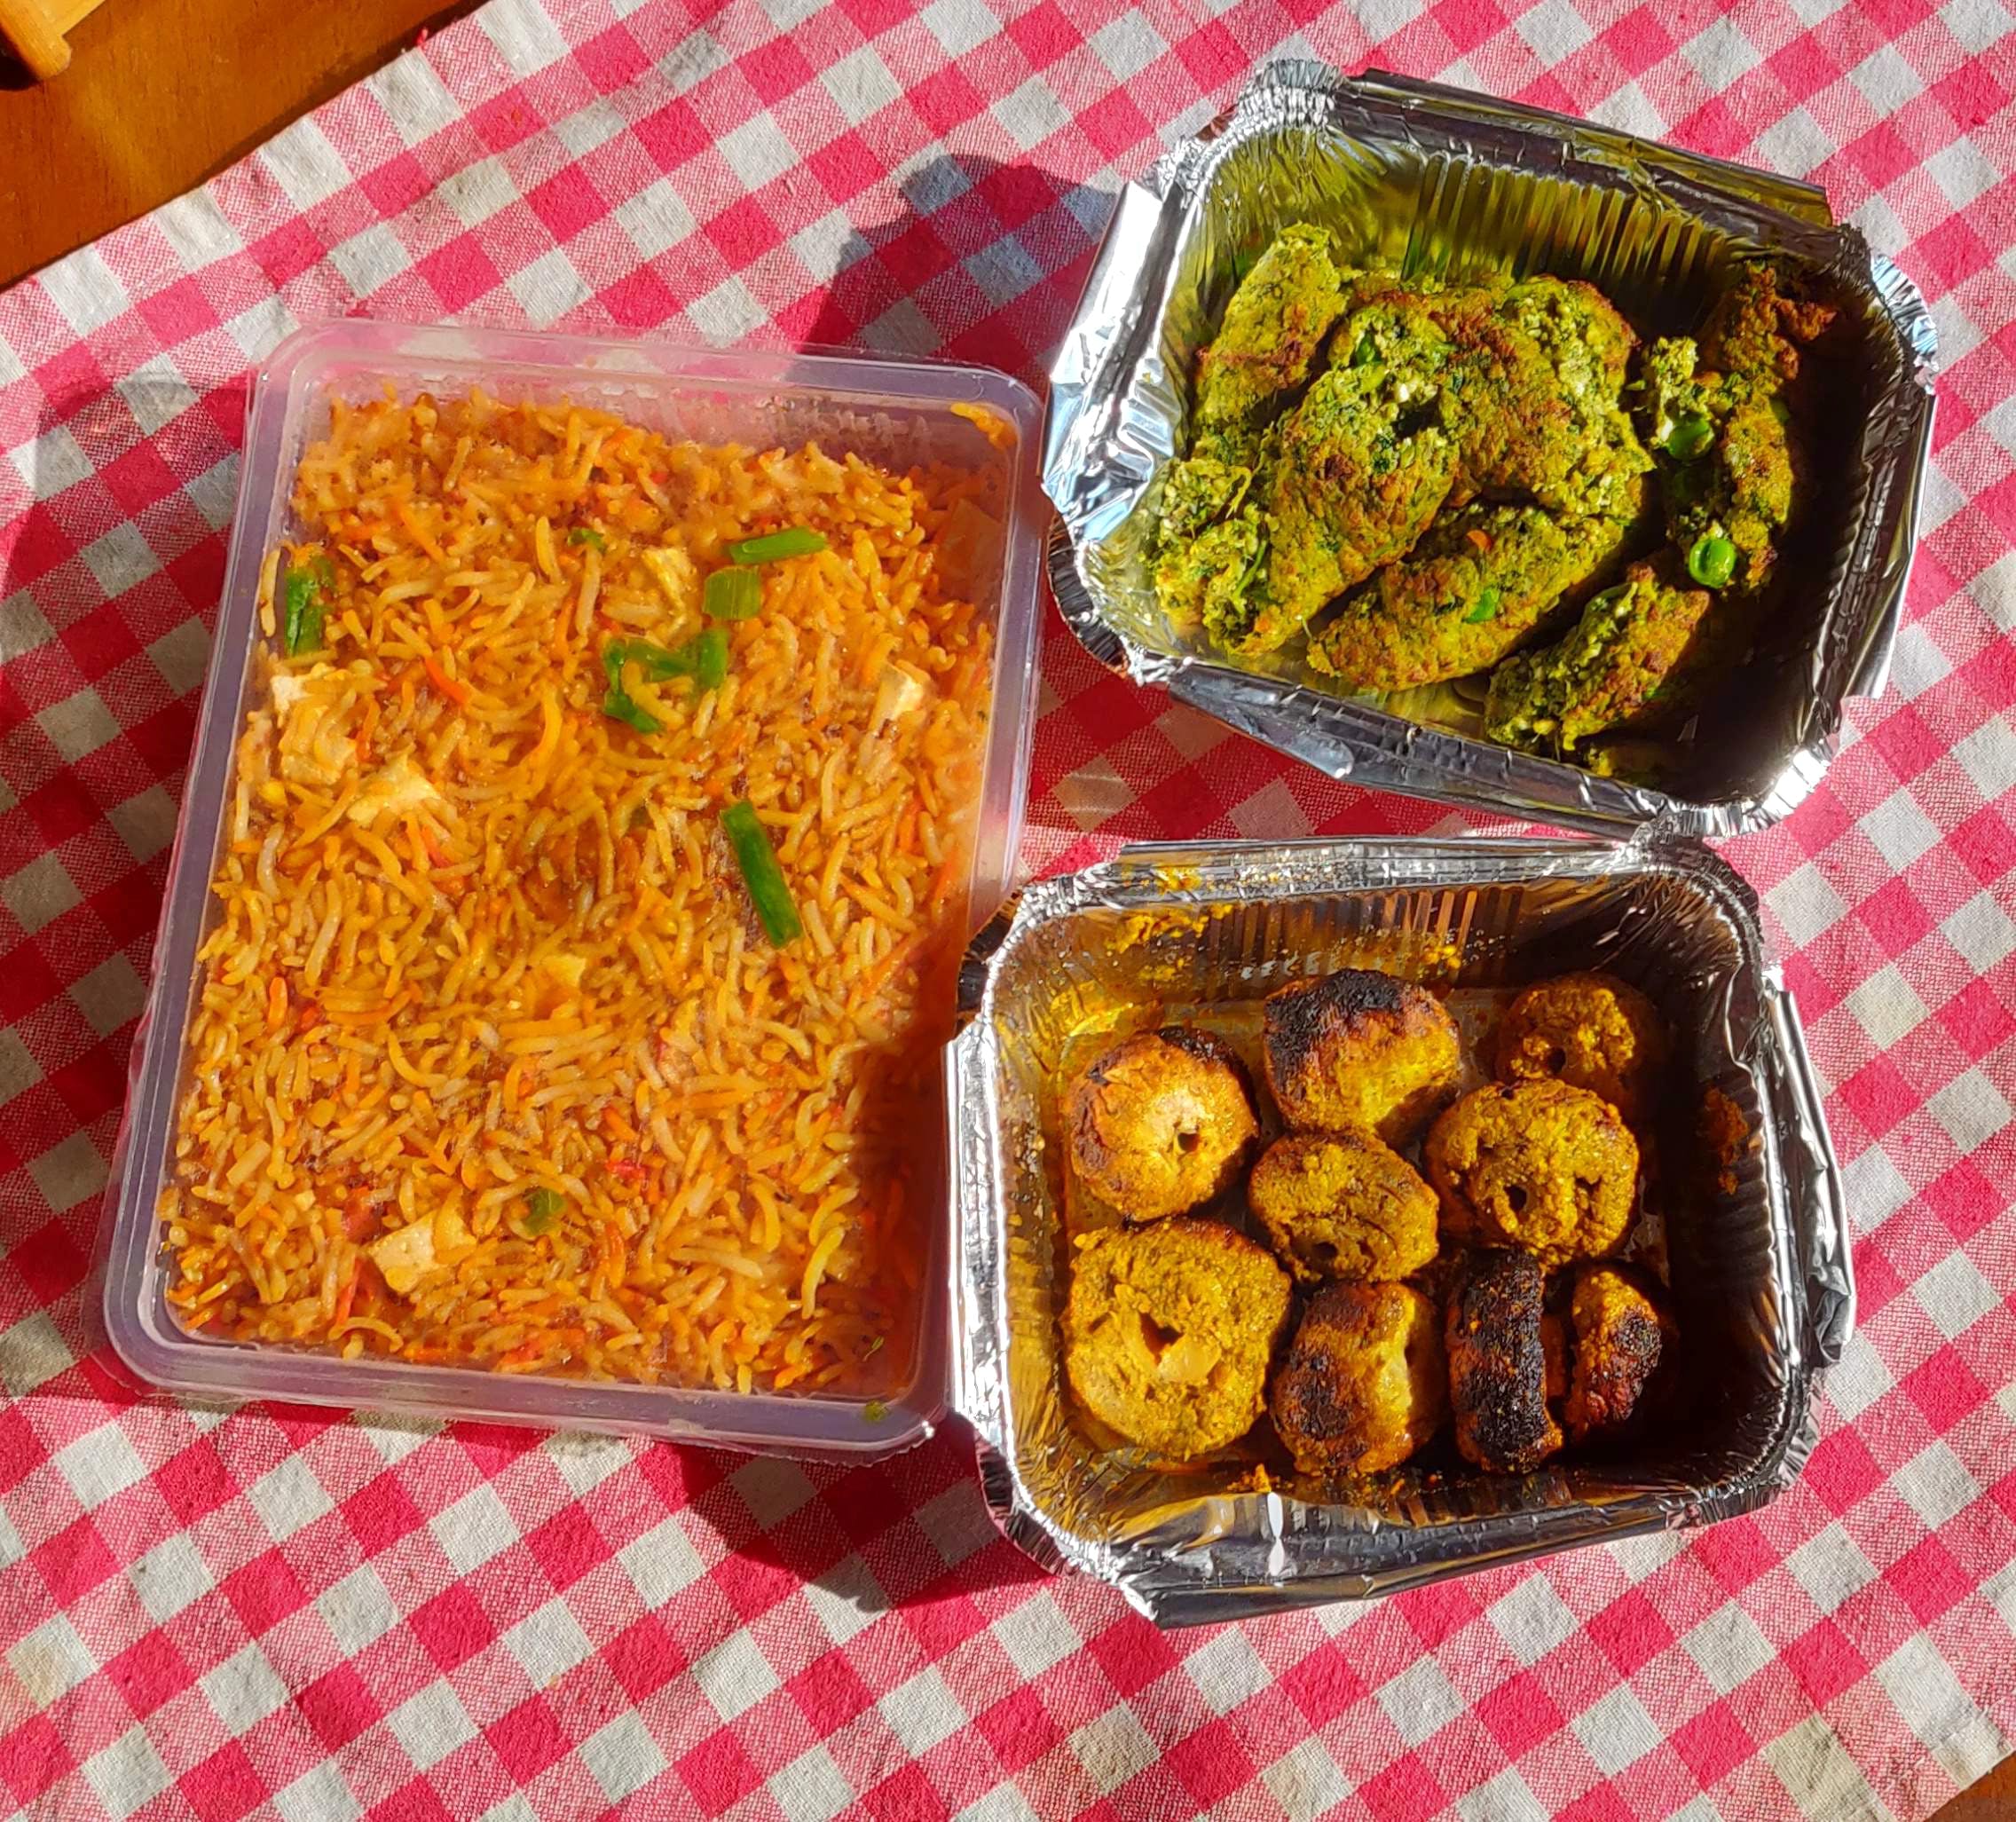 Dish,Food,Cuisine,Ingredient,Comfort food,Meal,Produce,Prepackaged meal,Take-out food,Indian cuisine